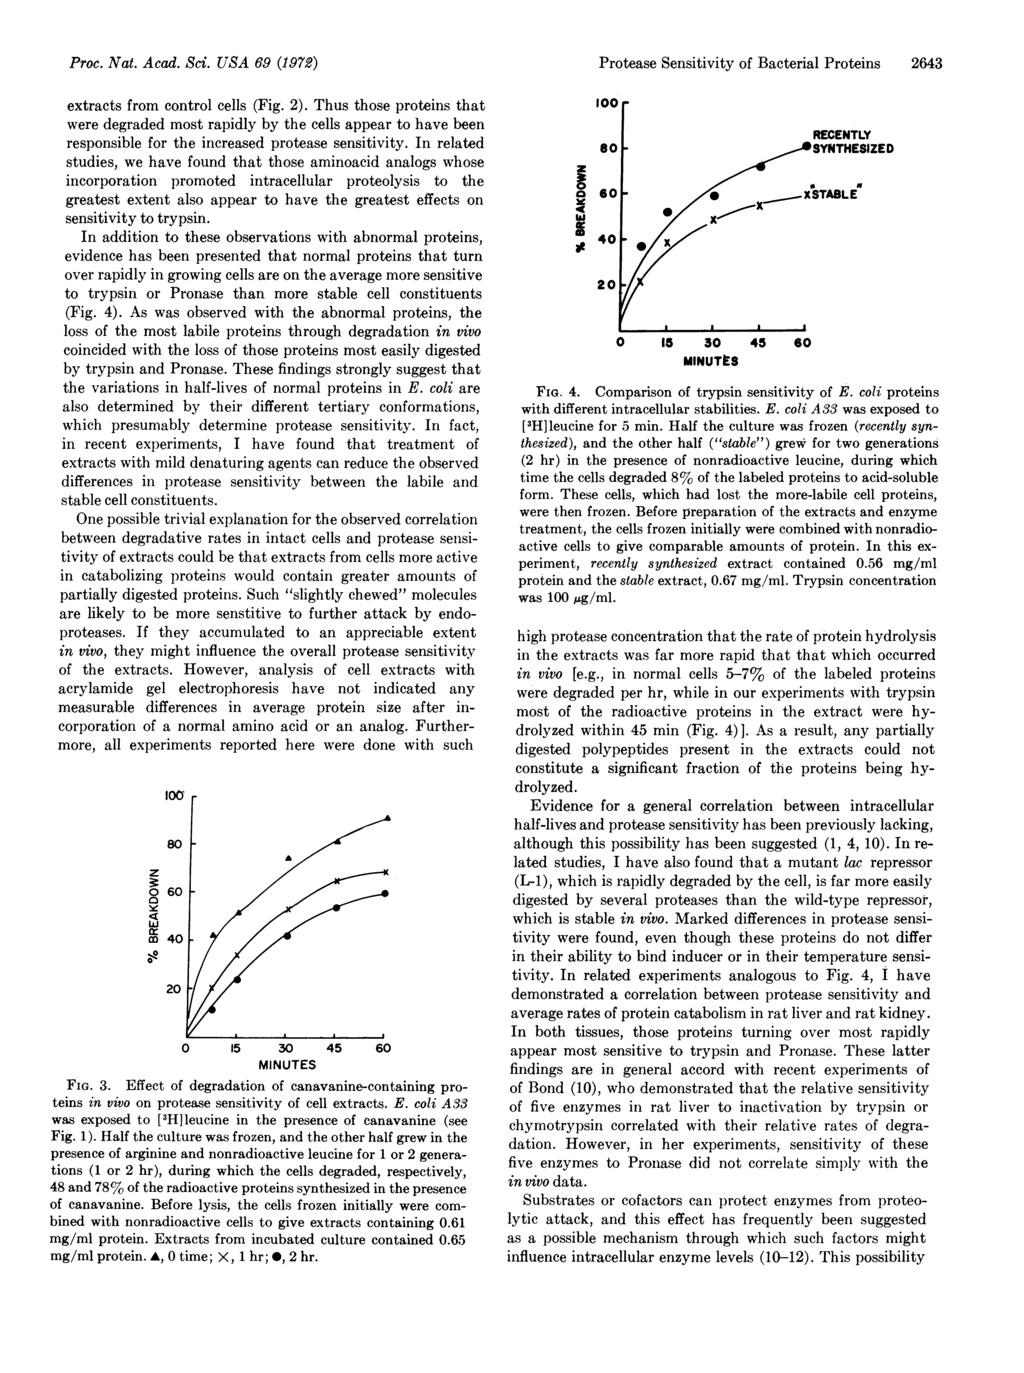 Proc. Nat. Acad. Sci. USA 69 (1972) extracts from control cells (Fig. 2).